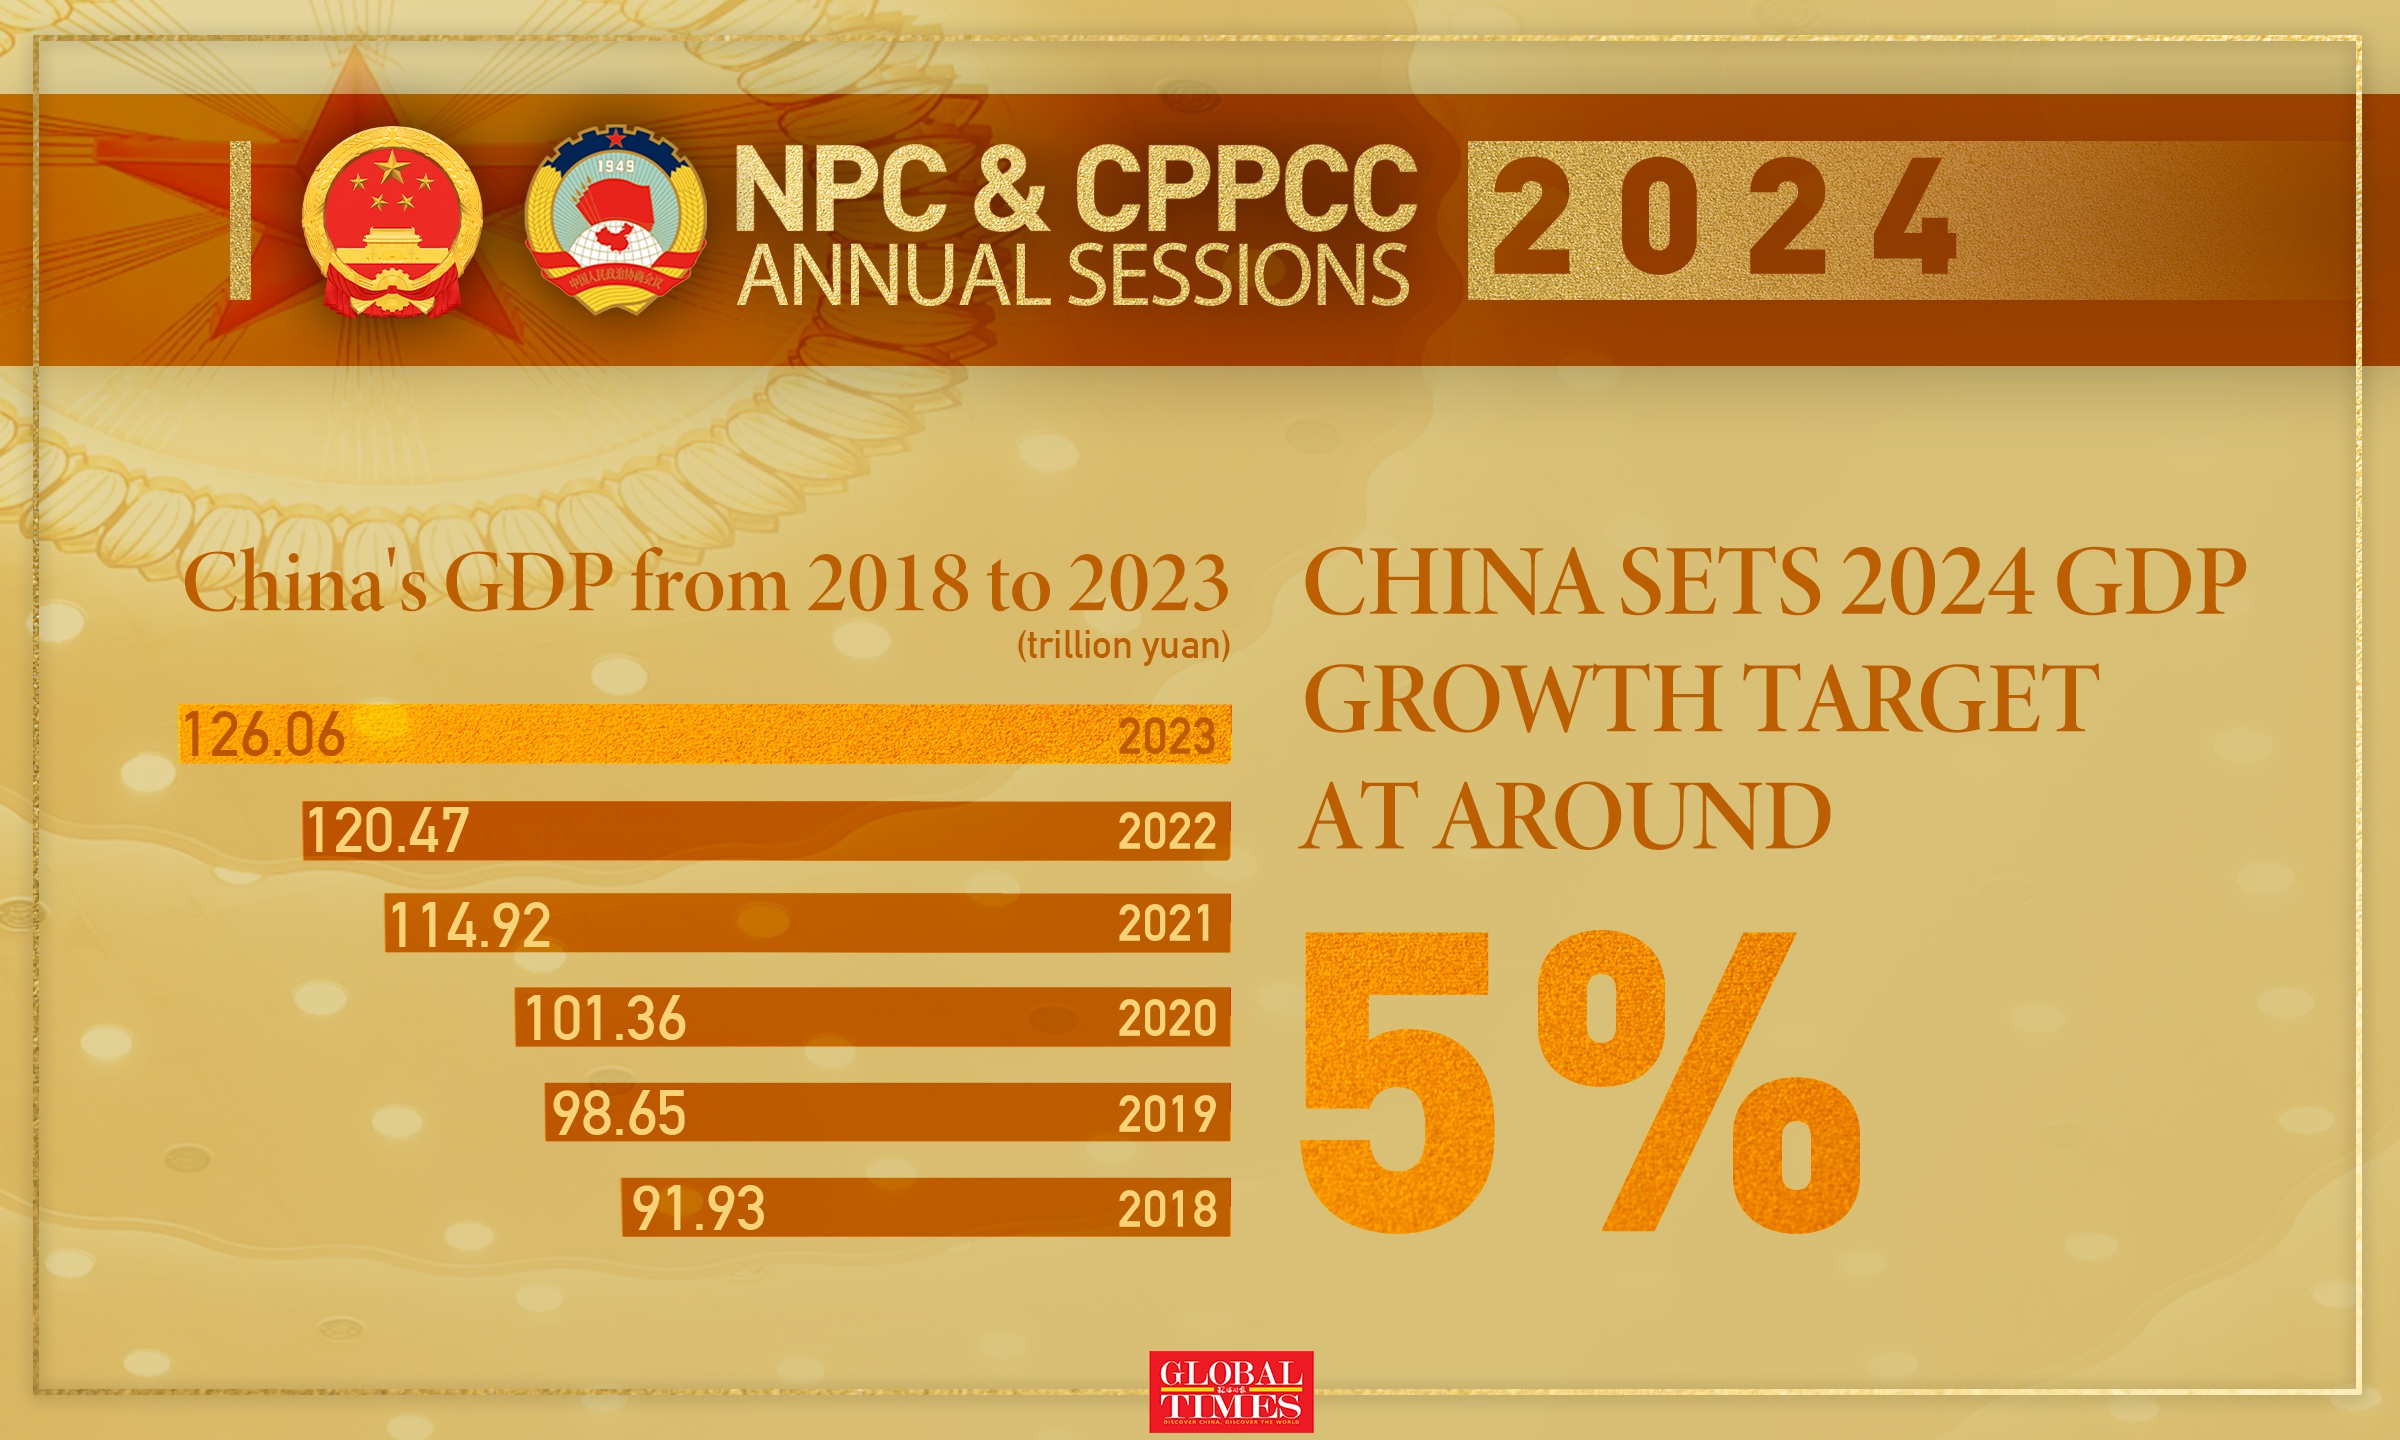 China sets 2024 GDP growth target at around 5%, showing confidence in economic recovery